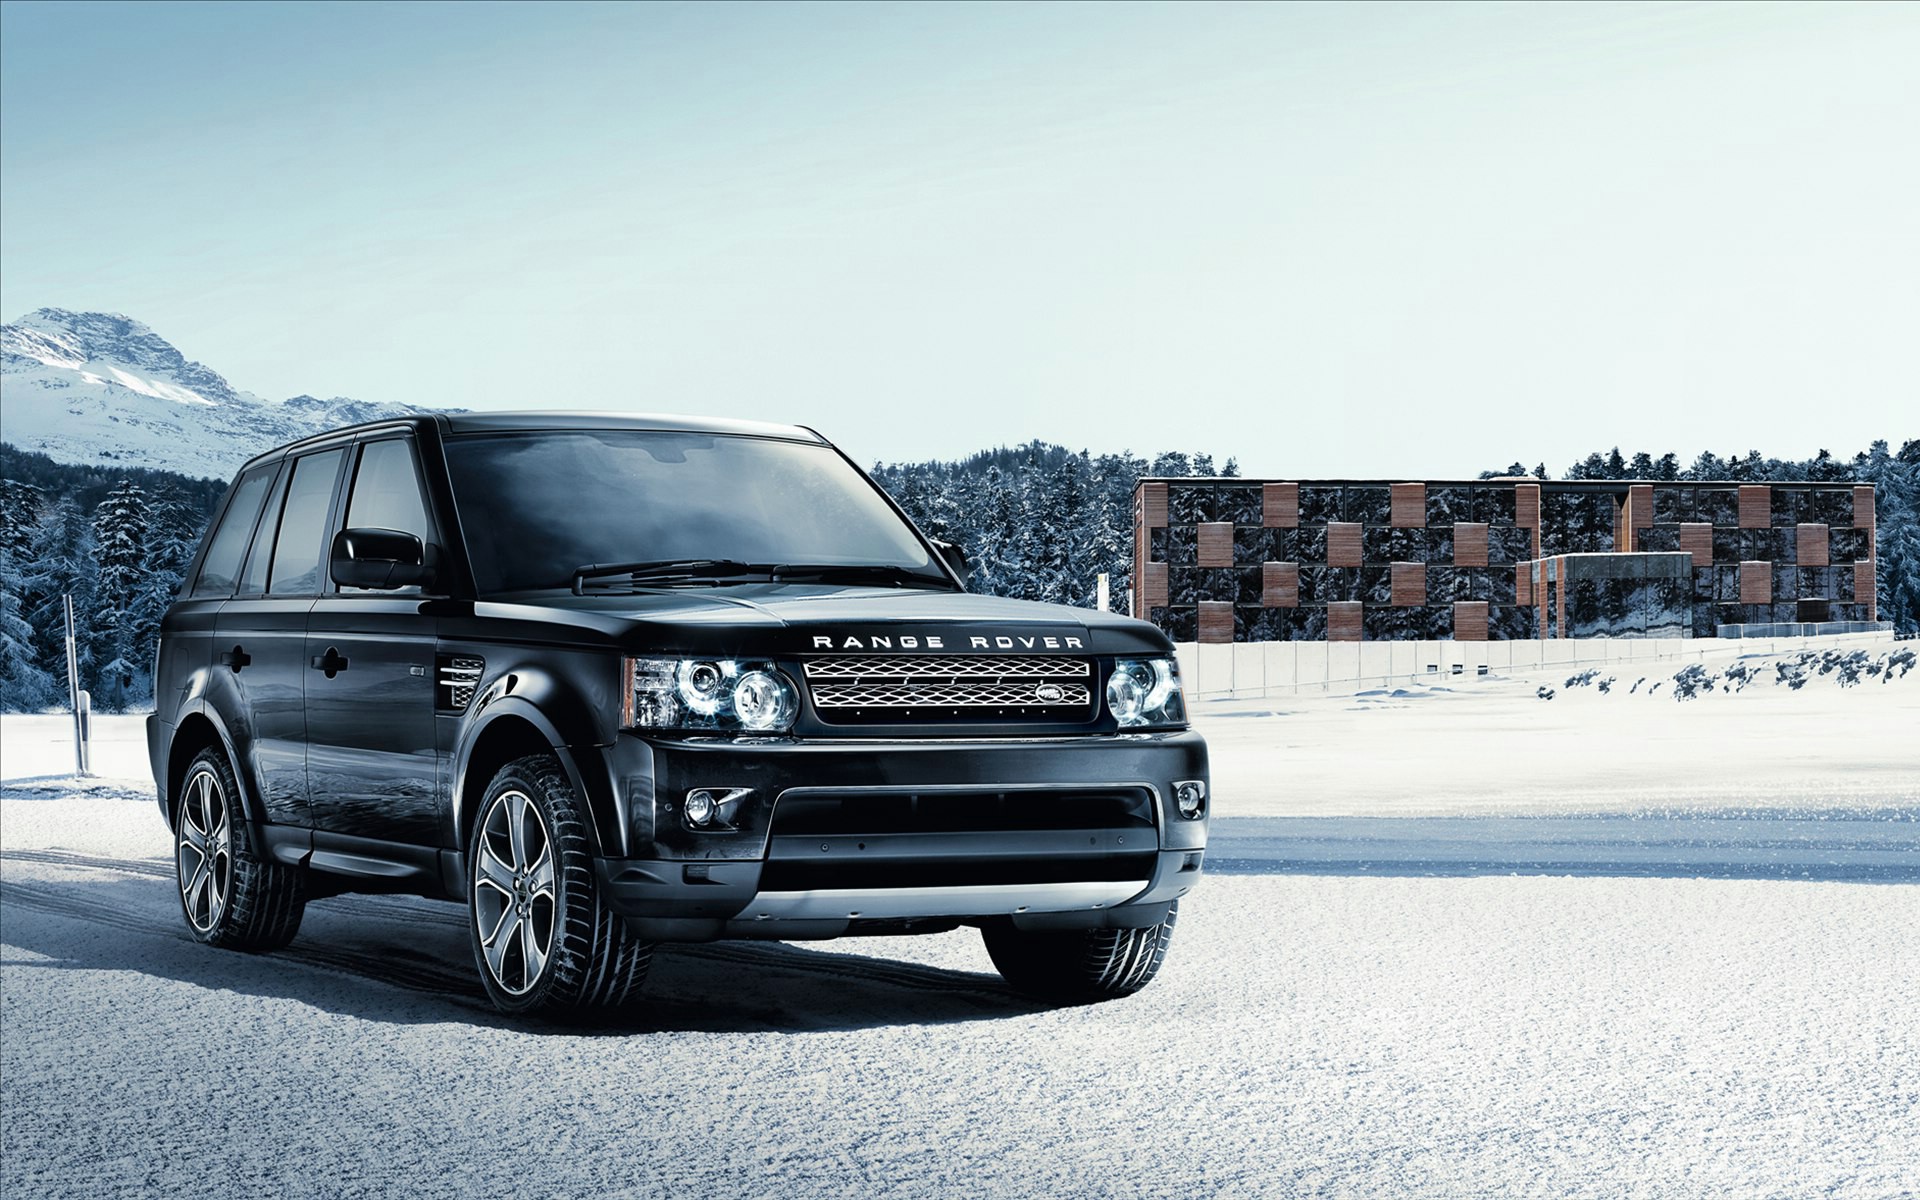 Range Rover Wallpaper Image Amp Pictures Becuo